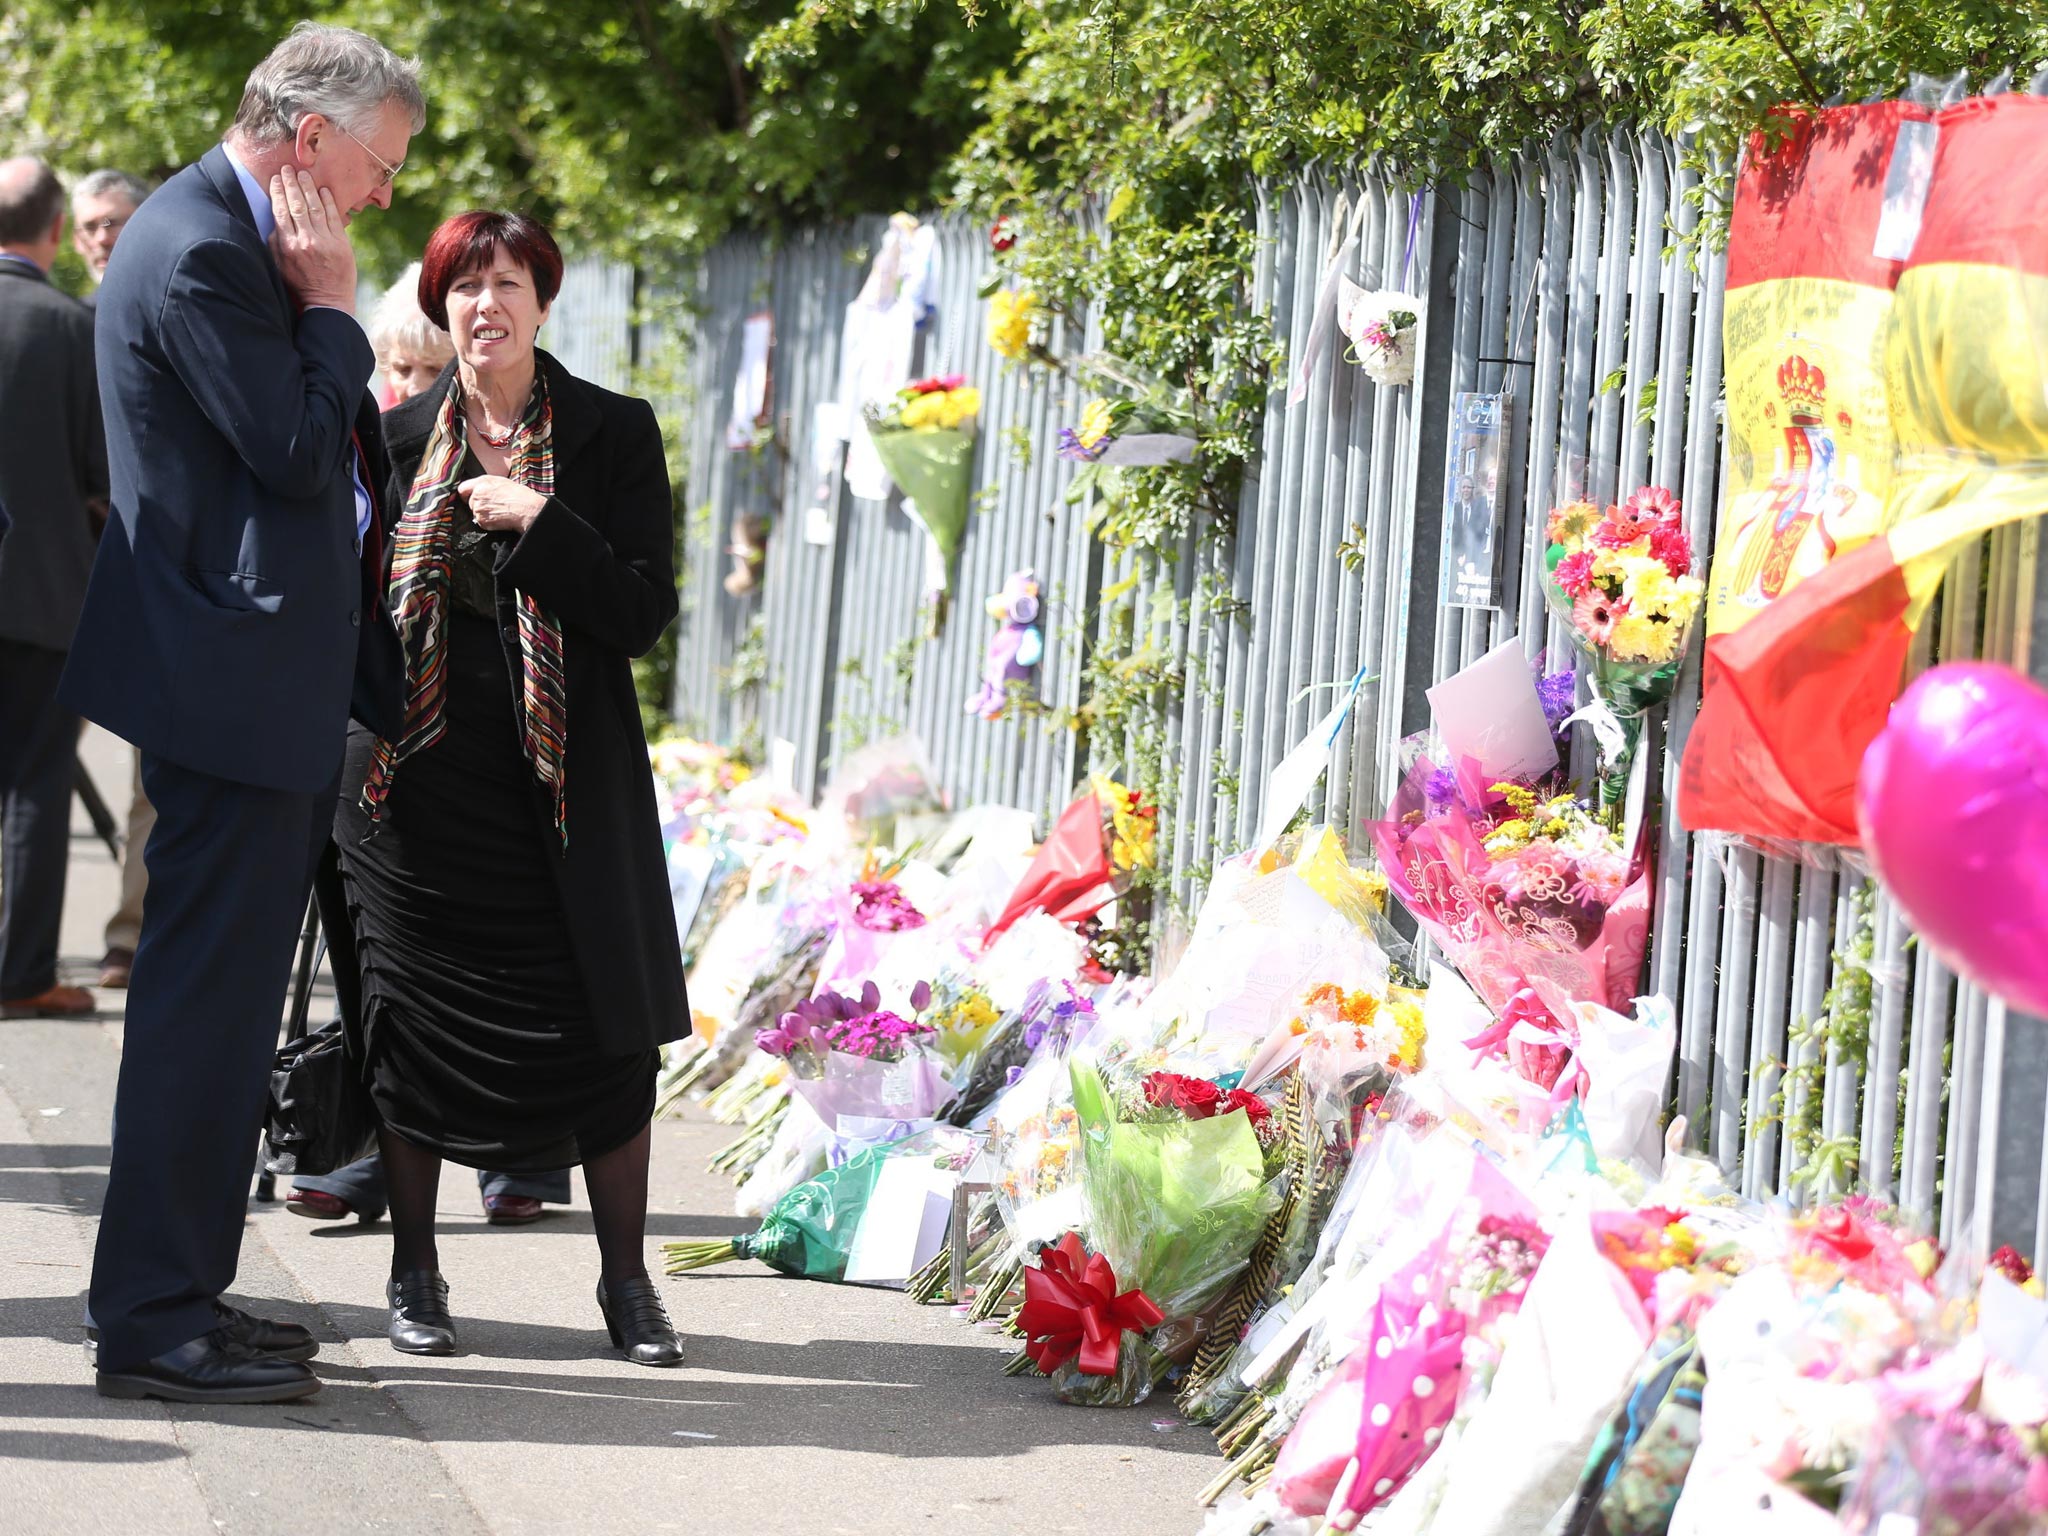 The Leeds MP Hilary Benn visiting the site of Ann Maguire’s stabbing